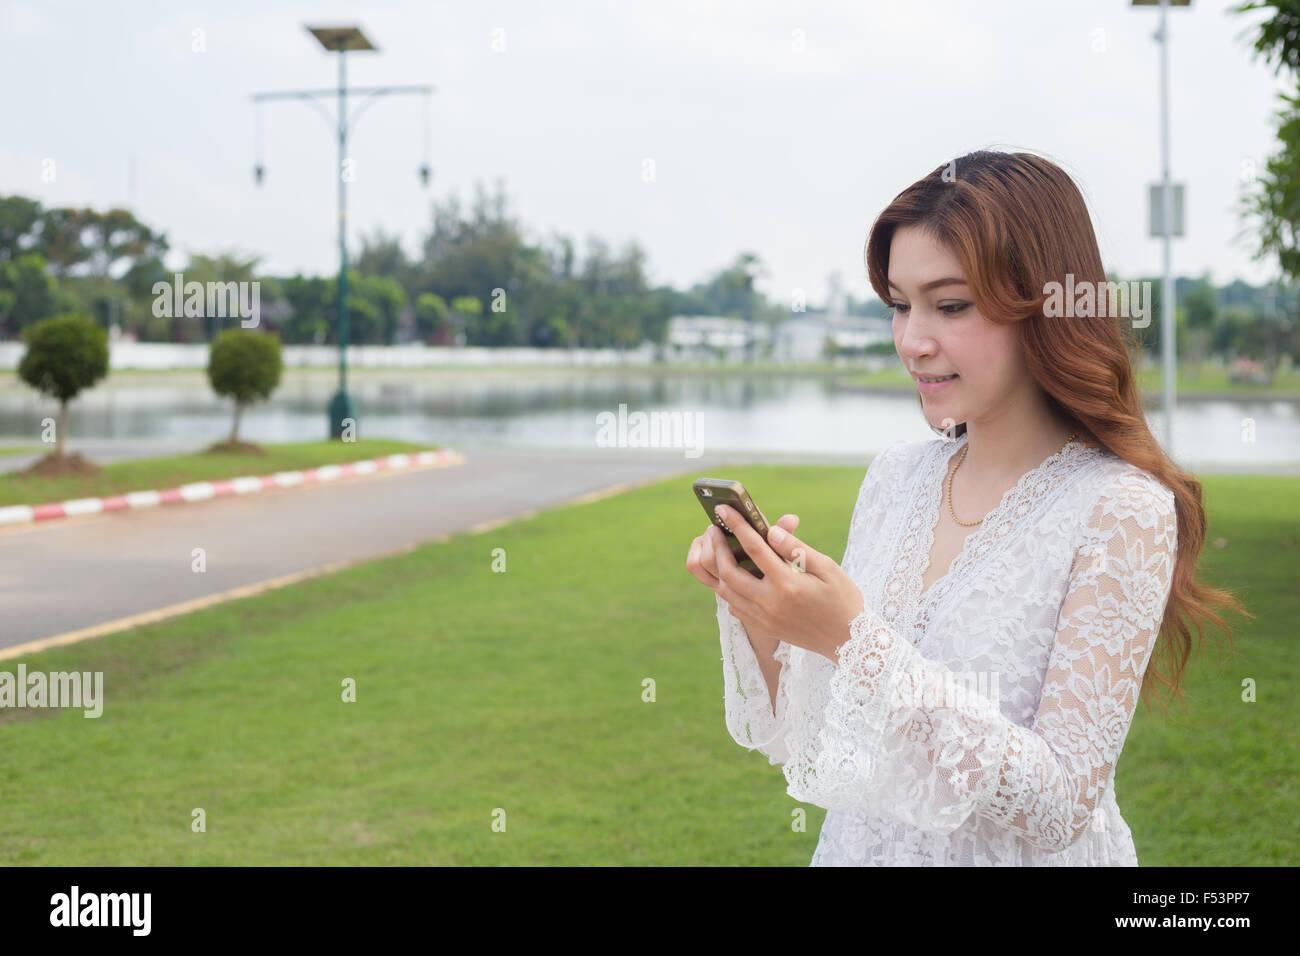 women sharing social media in a smart phone at public park Stock Photo